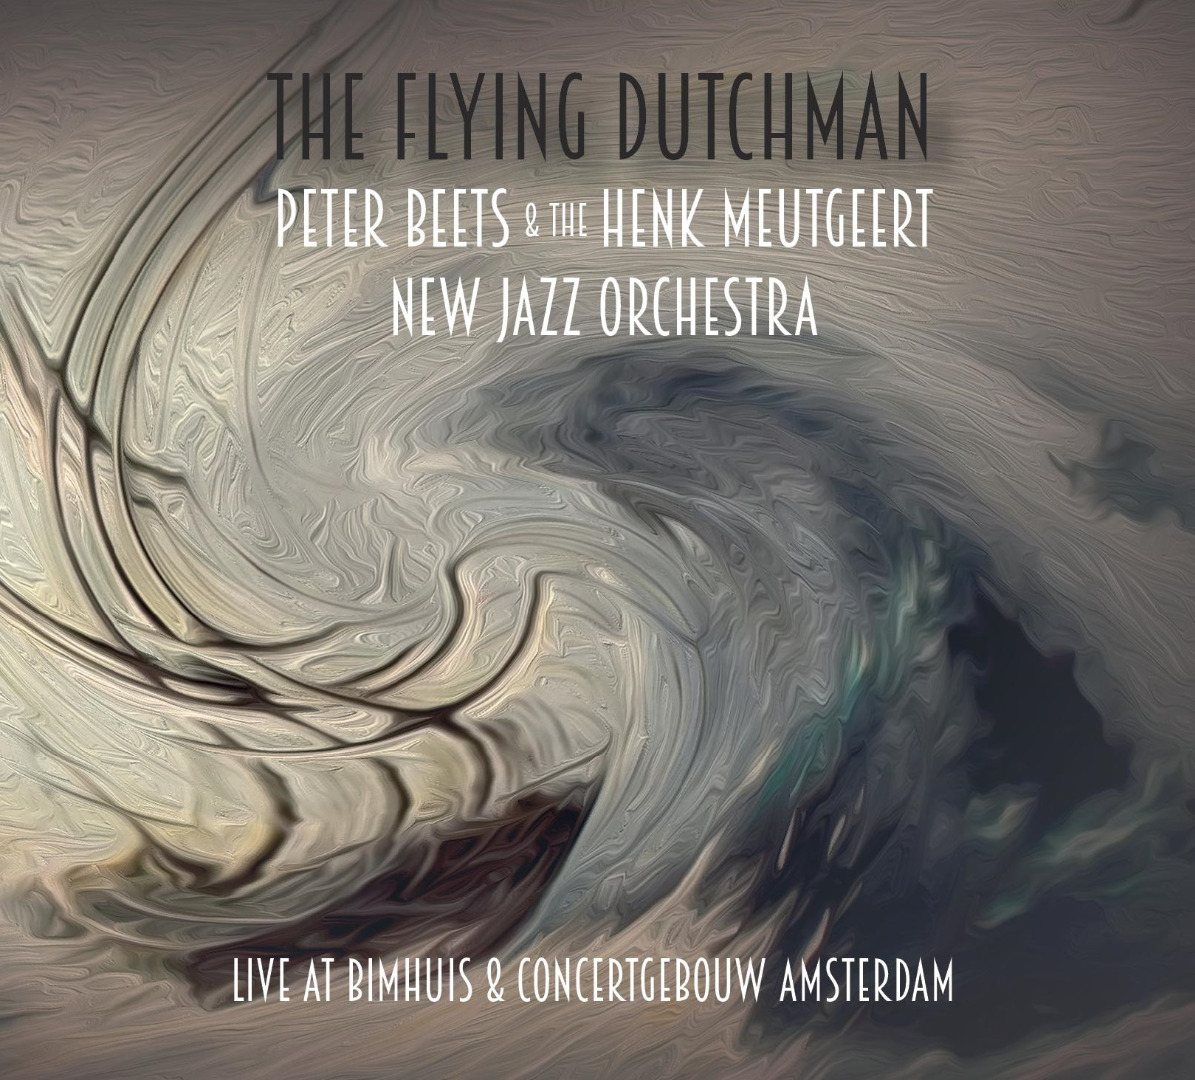 Peter Beets & The Henk Meutgeert New Jazz Orchestra - The Flying Dutchman